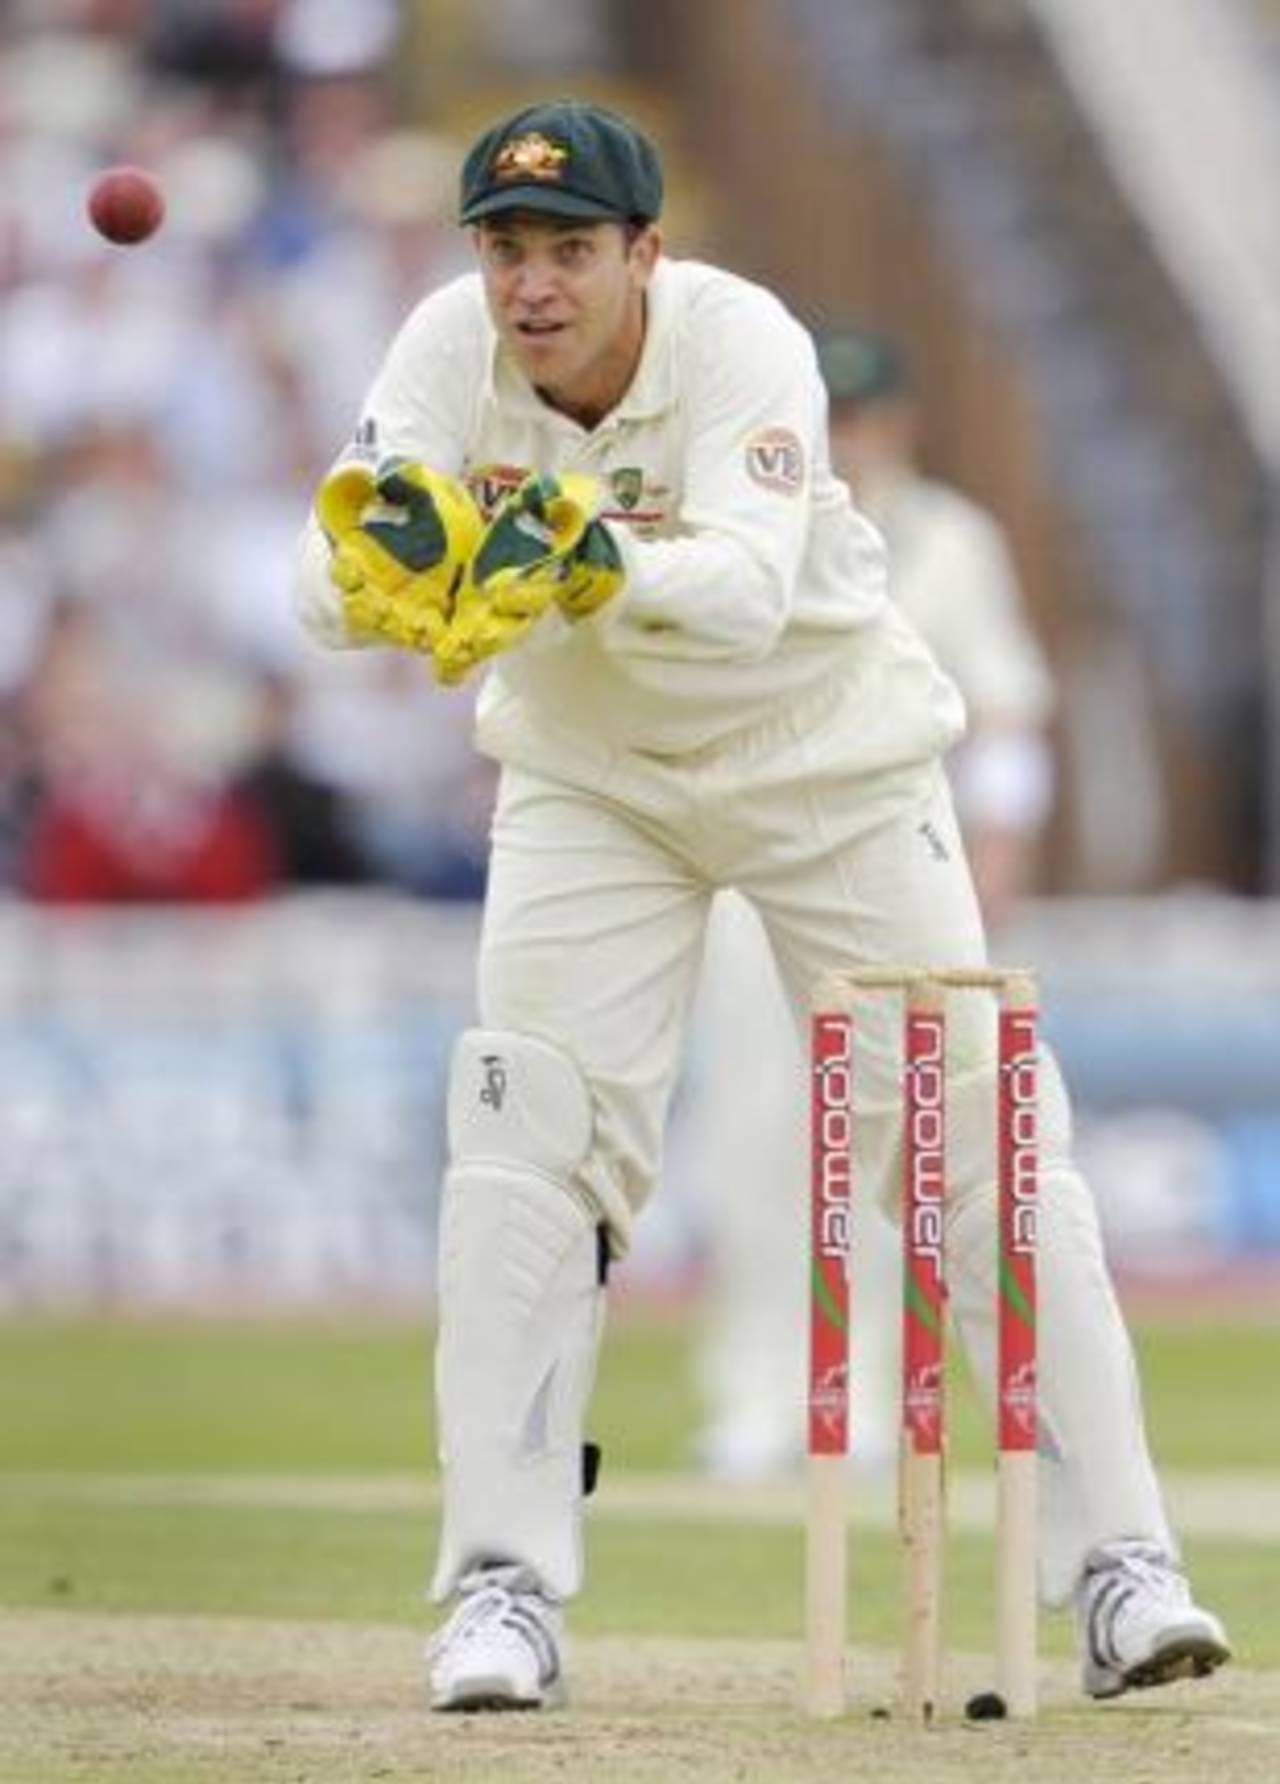 Graham Manou receives a ball from the outfield, England v Australia, 3rd Test, Edgbaston, 2nd day, July 31, 2009